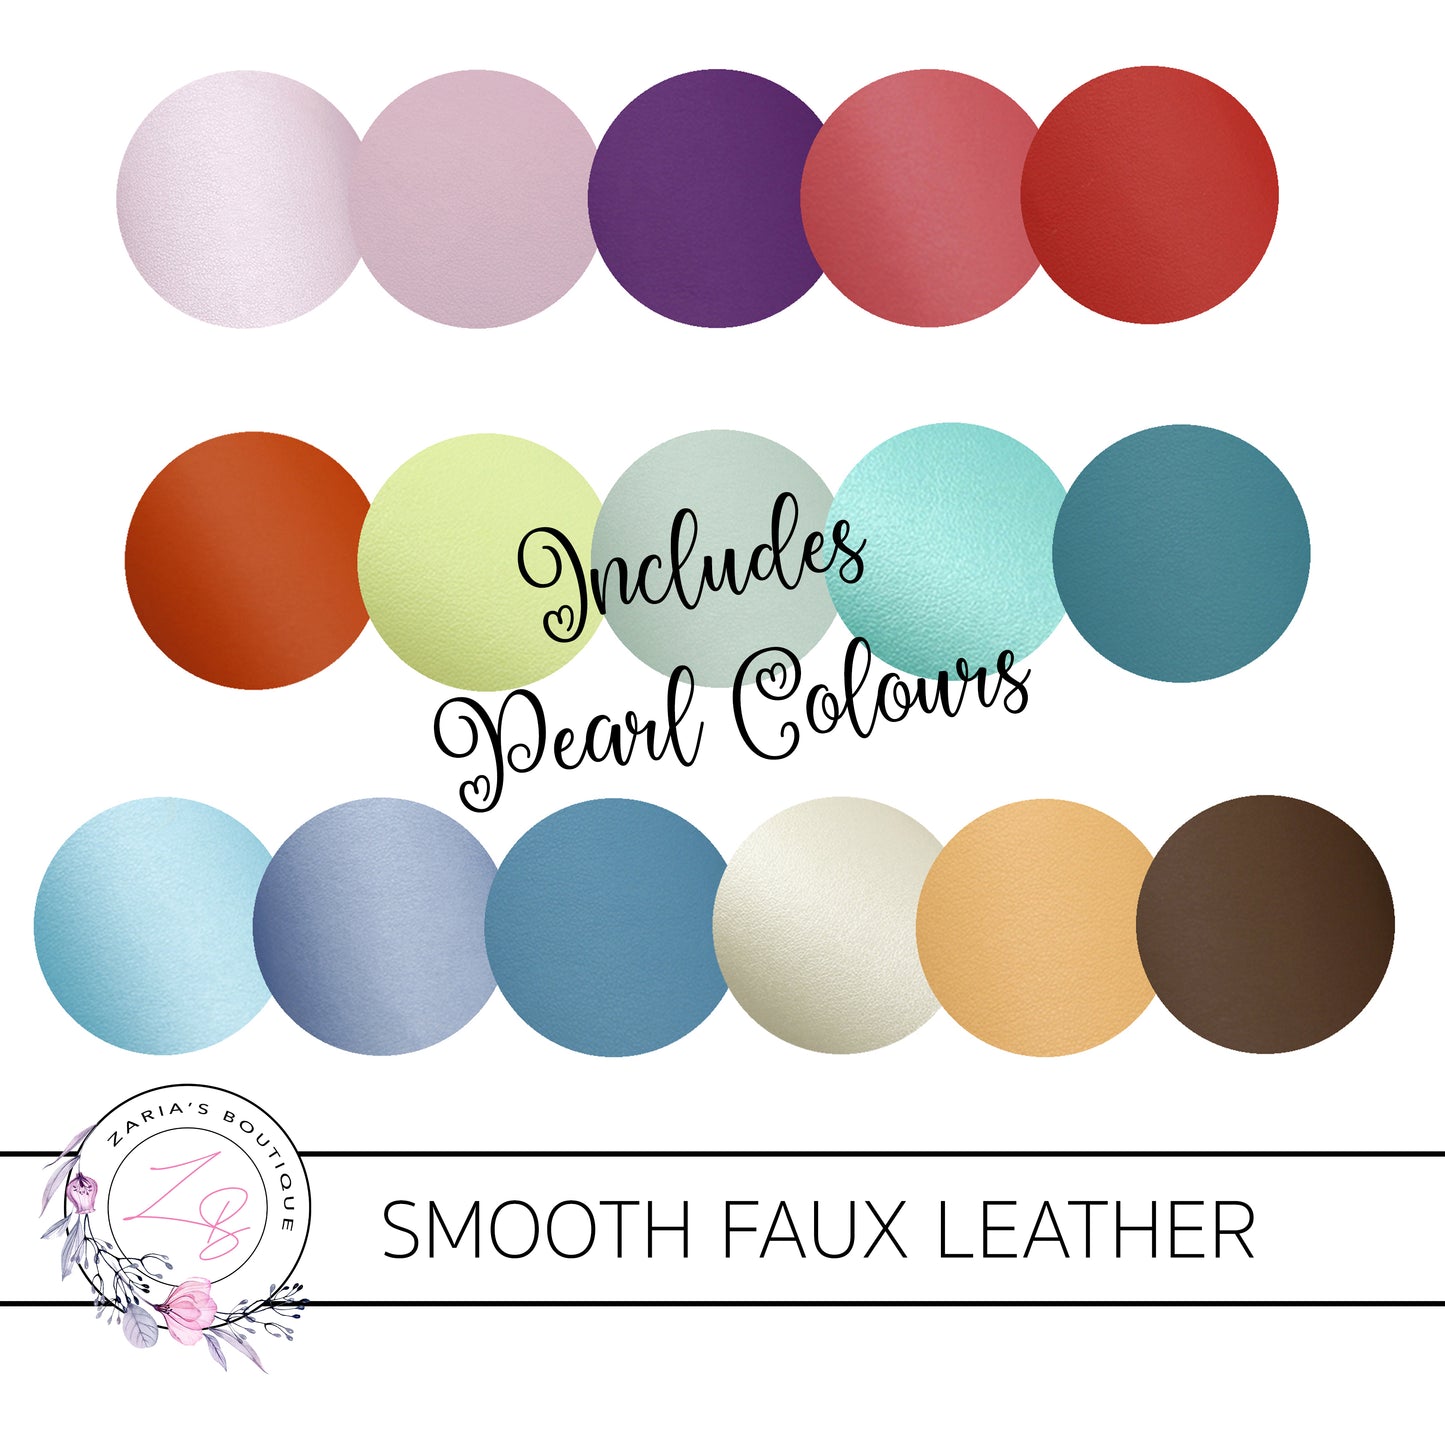 Smooth Fine Grain Faux Leather Collection ~ Includes Pearl Colours ~ 0.56mm - 0.78mm